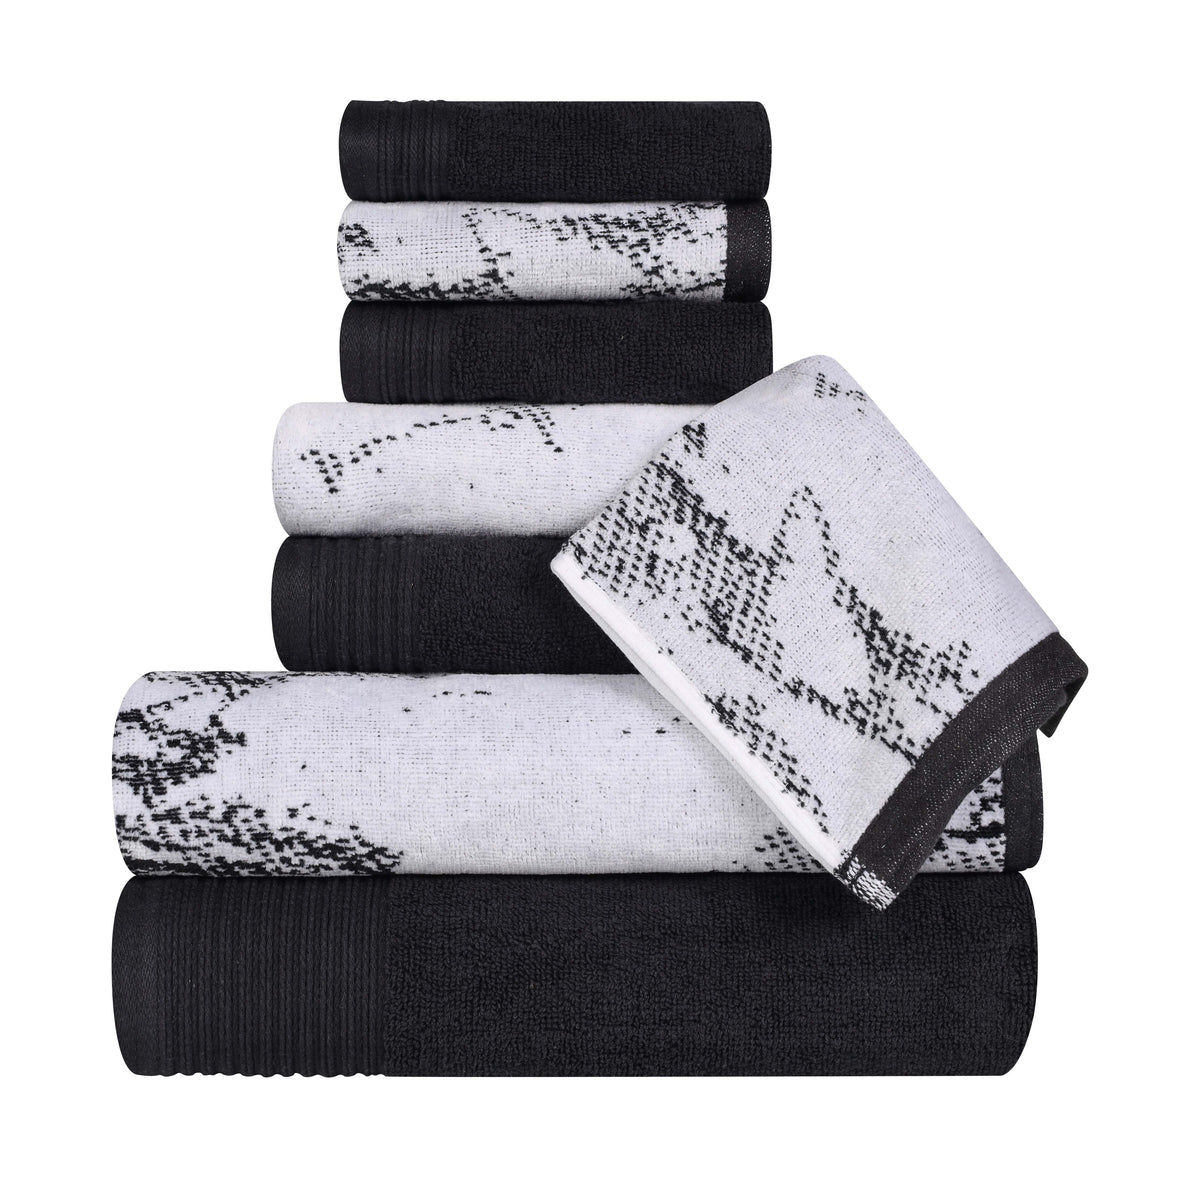 Cotton Marble and Solid Quick Dry 8 Piece Assorted Bathroom Towel Set - Black